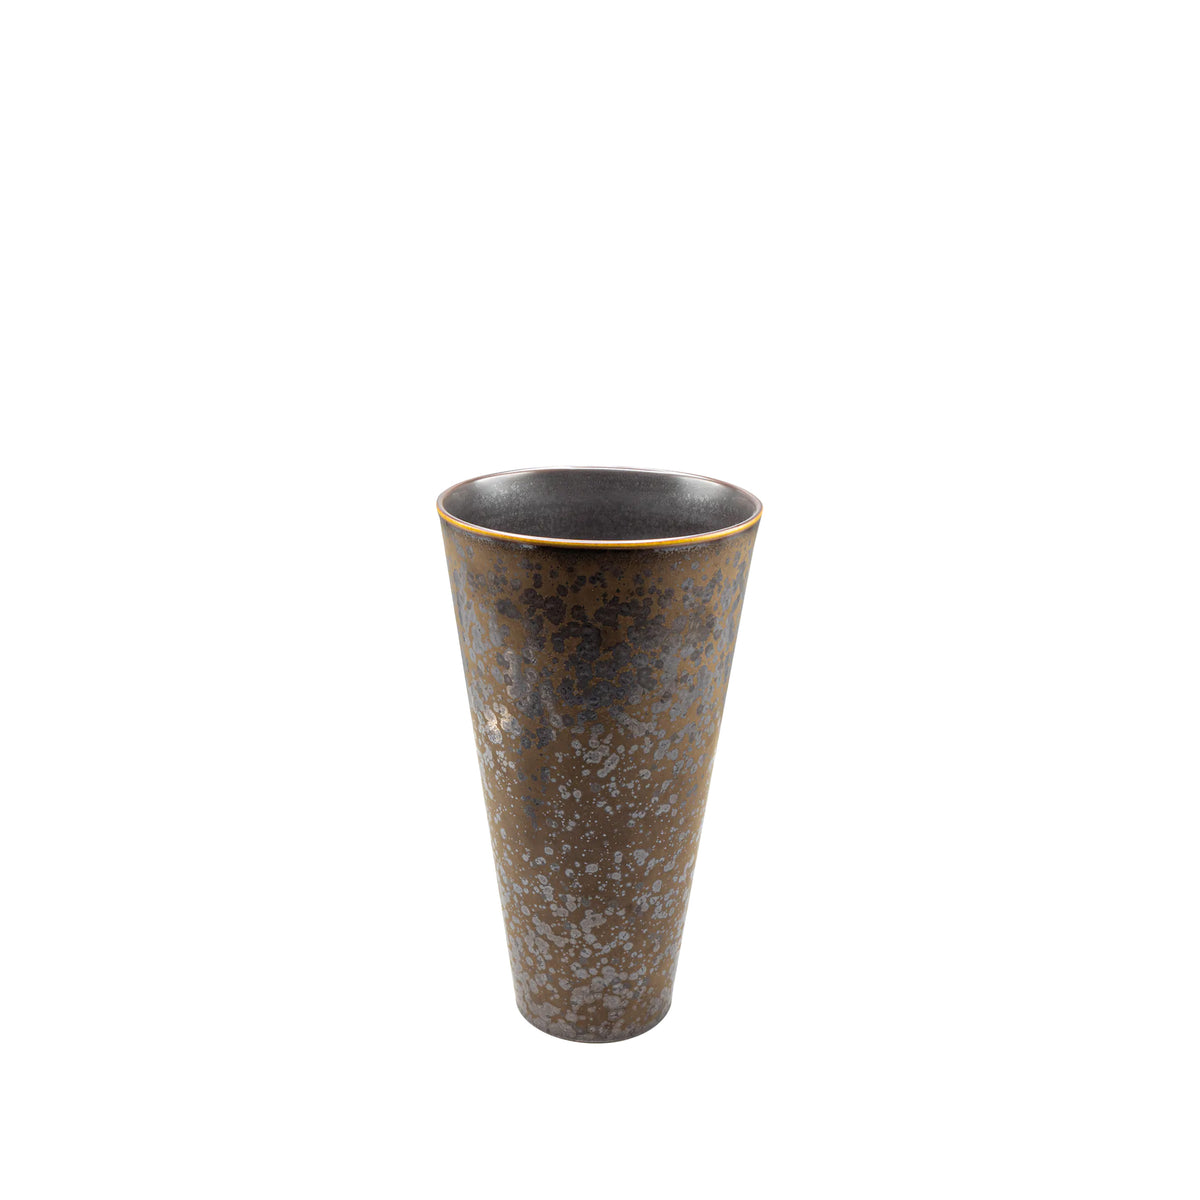 AGUIRRE - Straight vase, small